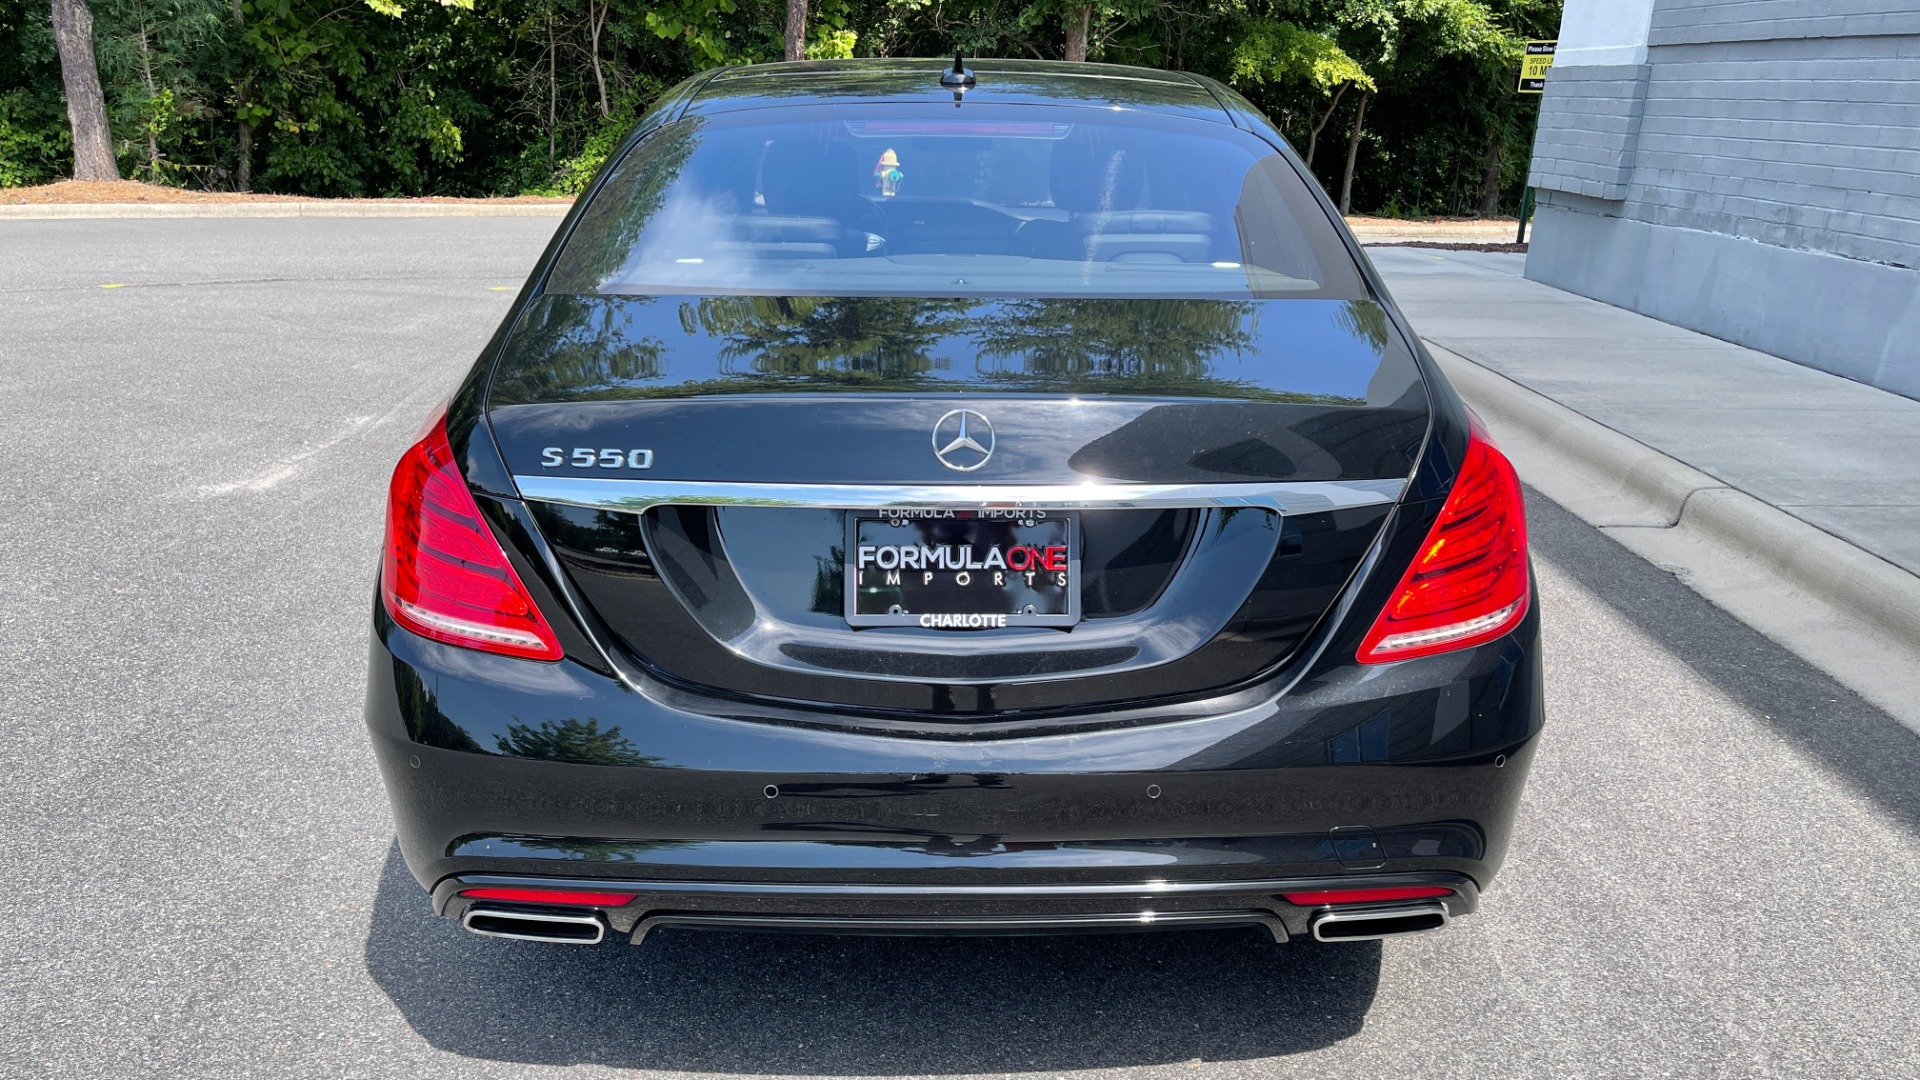 Used 2015 Mercedes-Benz S-Class S550 / 20IN AMG WHEELS / SPORT / COMFORT / PREMIUM / DRIVER ASSIST for sale $38,595 at Formula Imports in Charlotte NC 28227 24